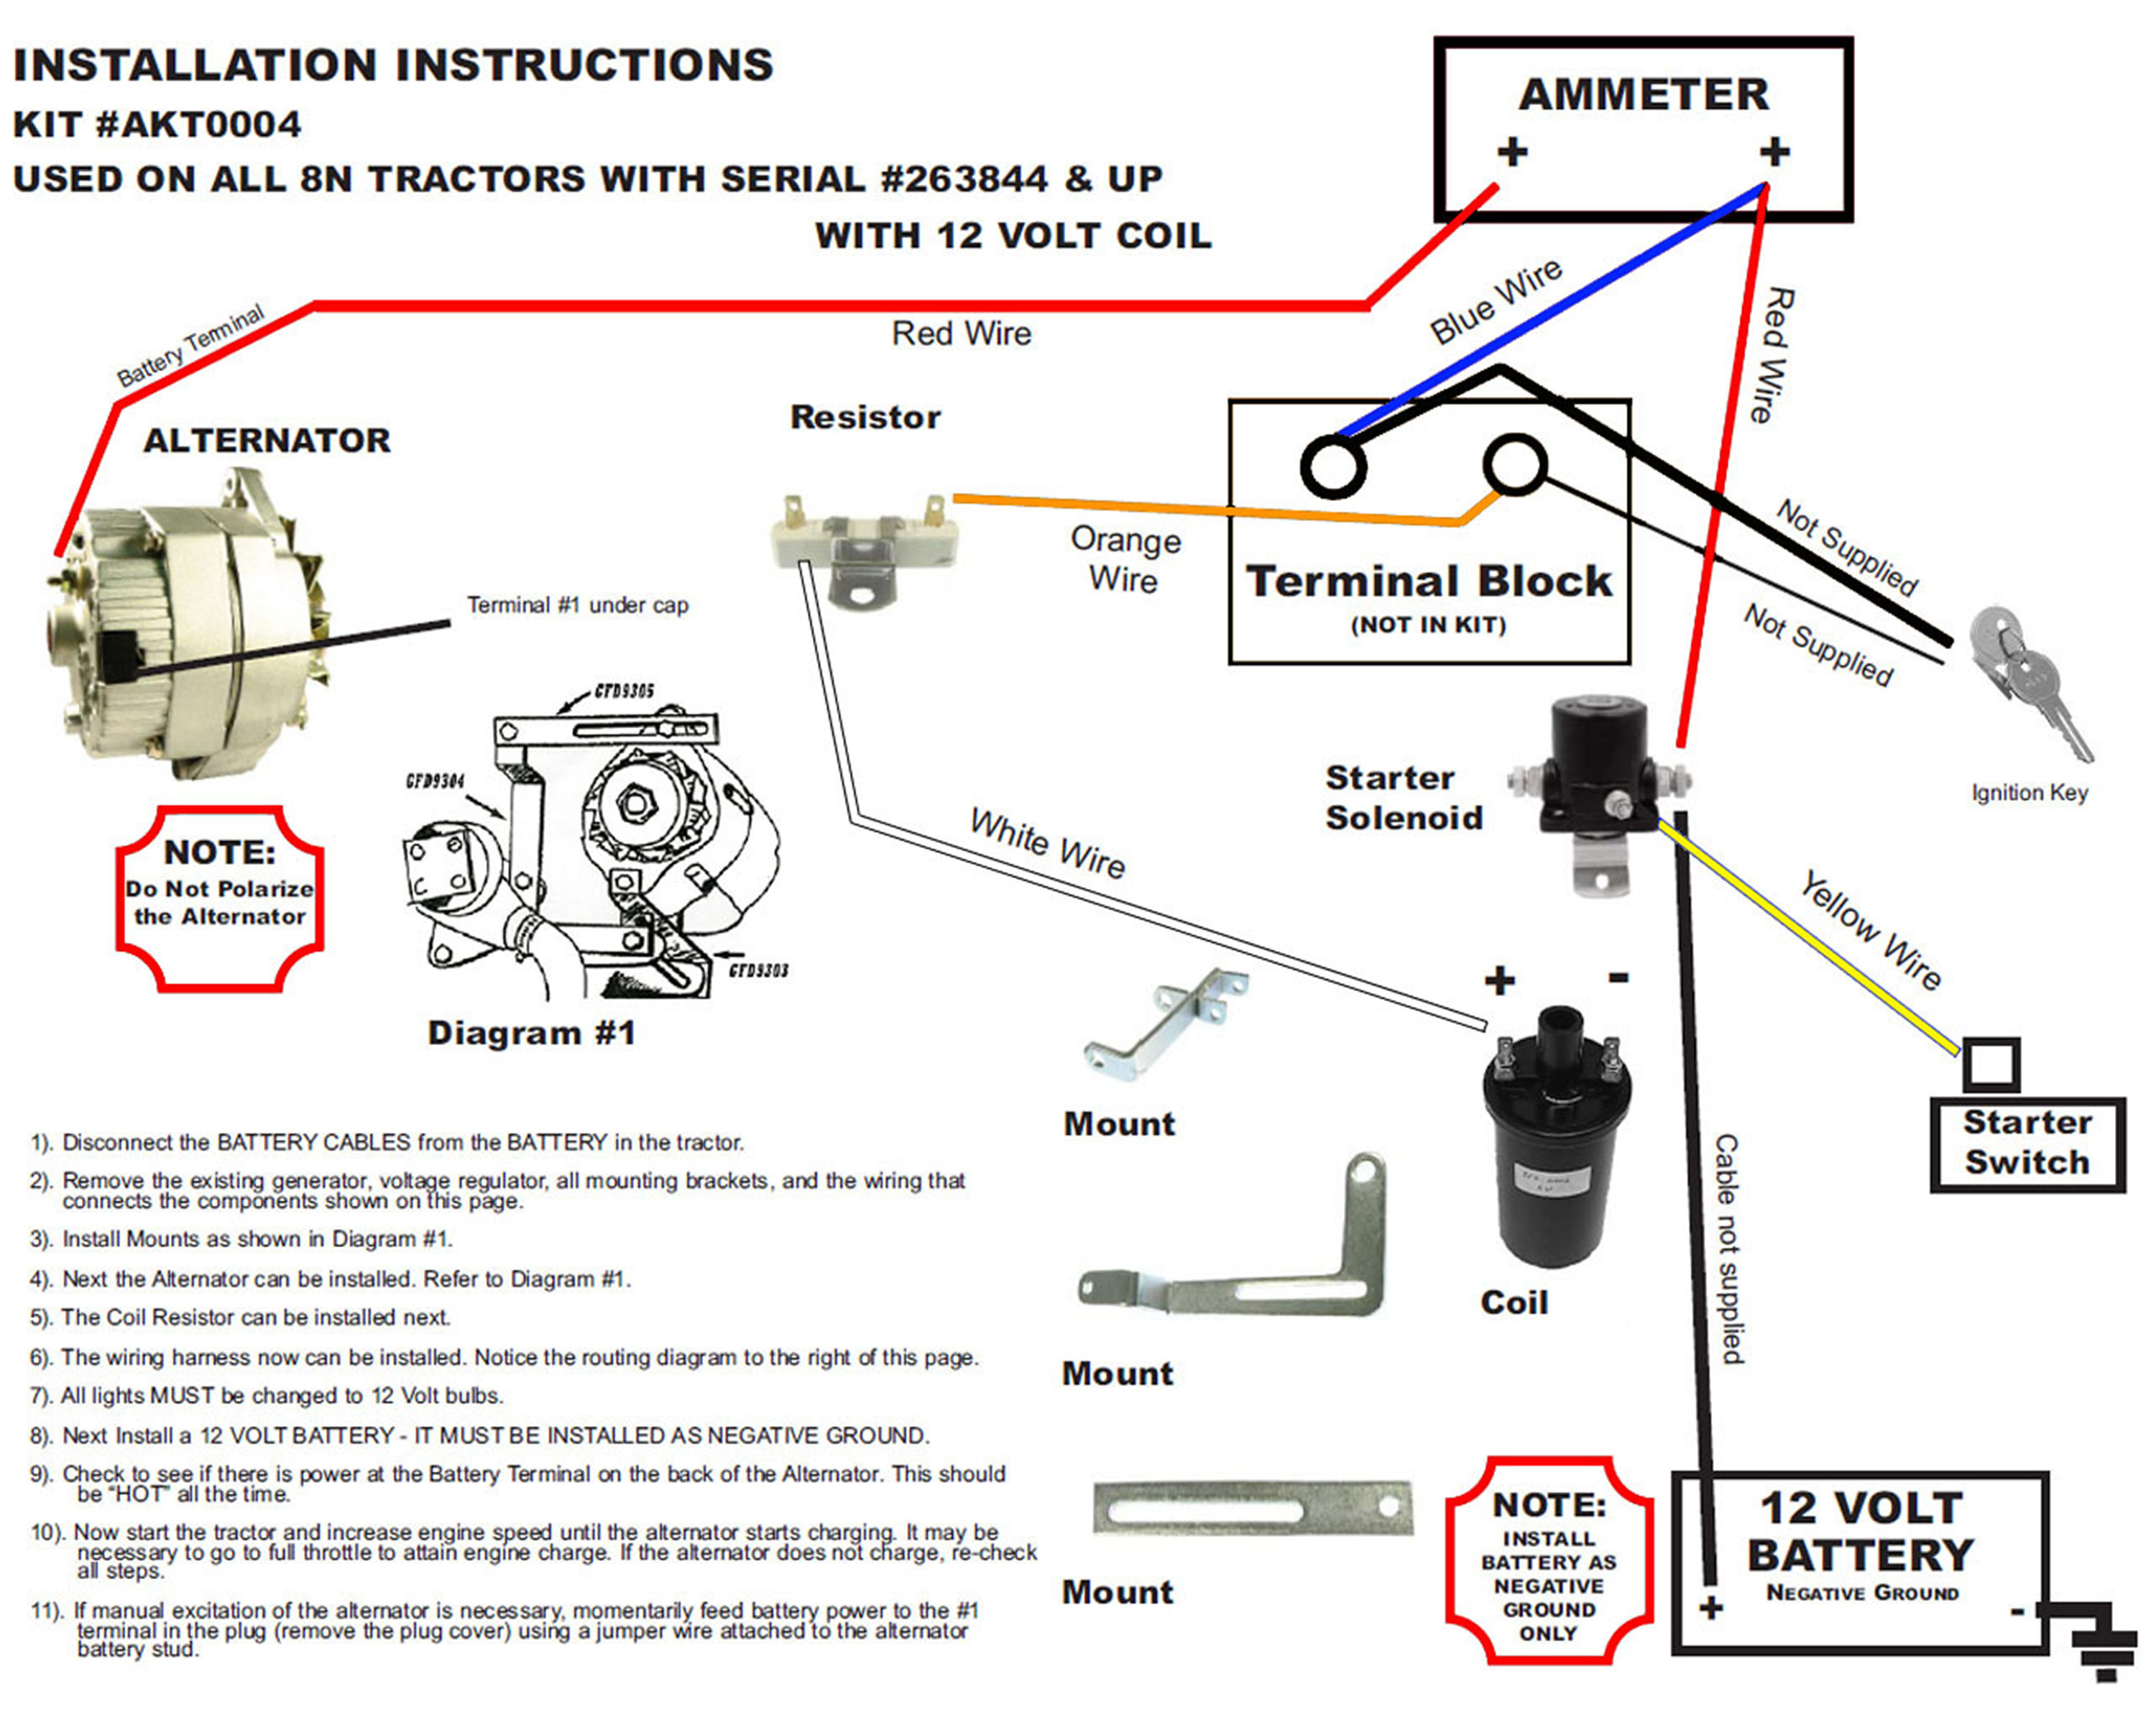 12 Volt Wiring Diagram Ford 8N Tractor 1 Wire Alternator - Wiring - 12 Volt Alternator Wiring Diagram